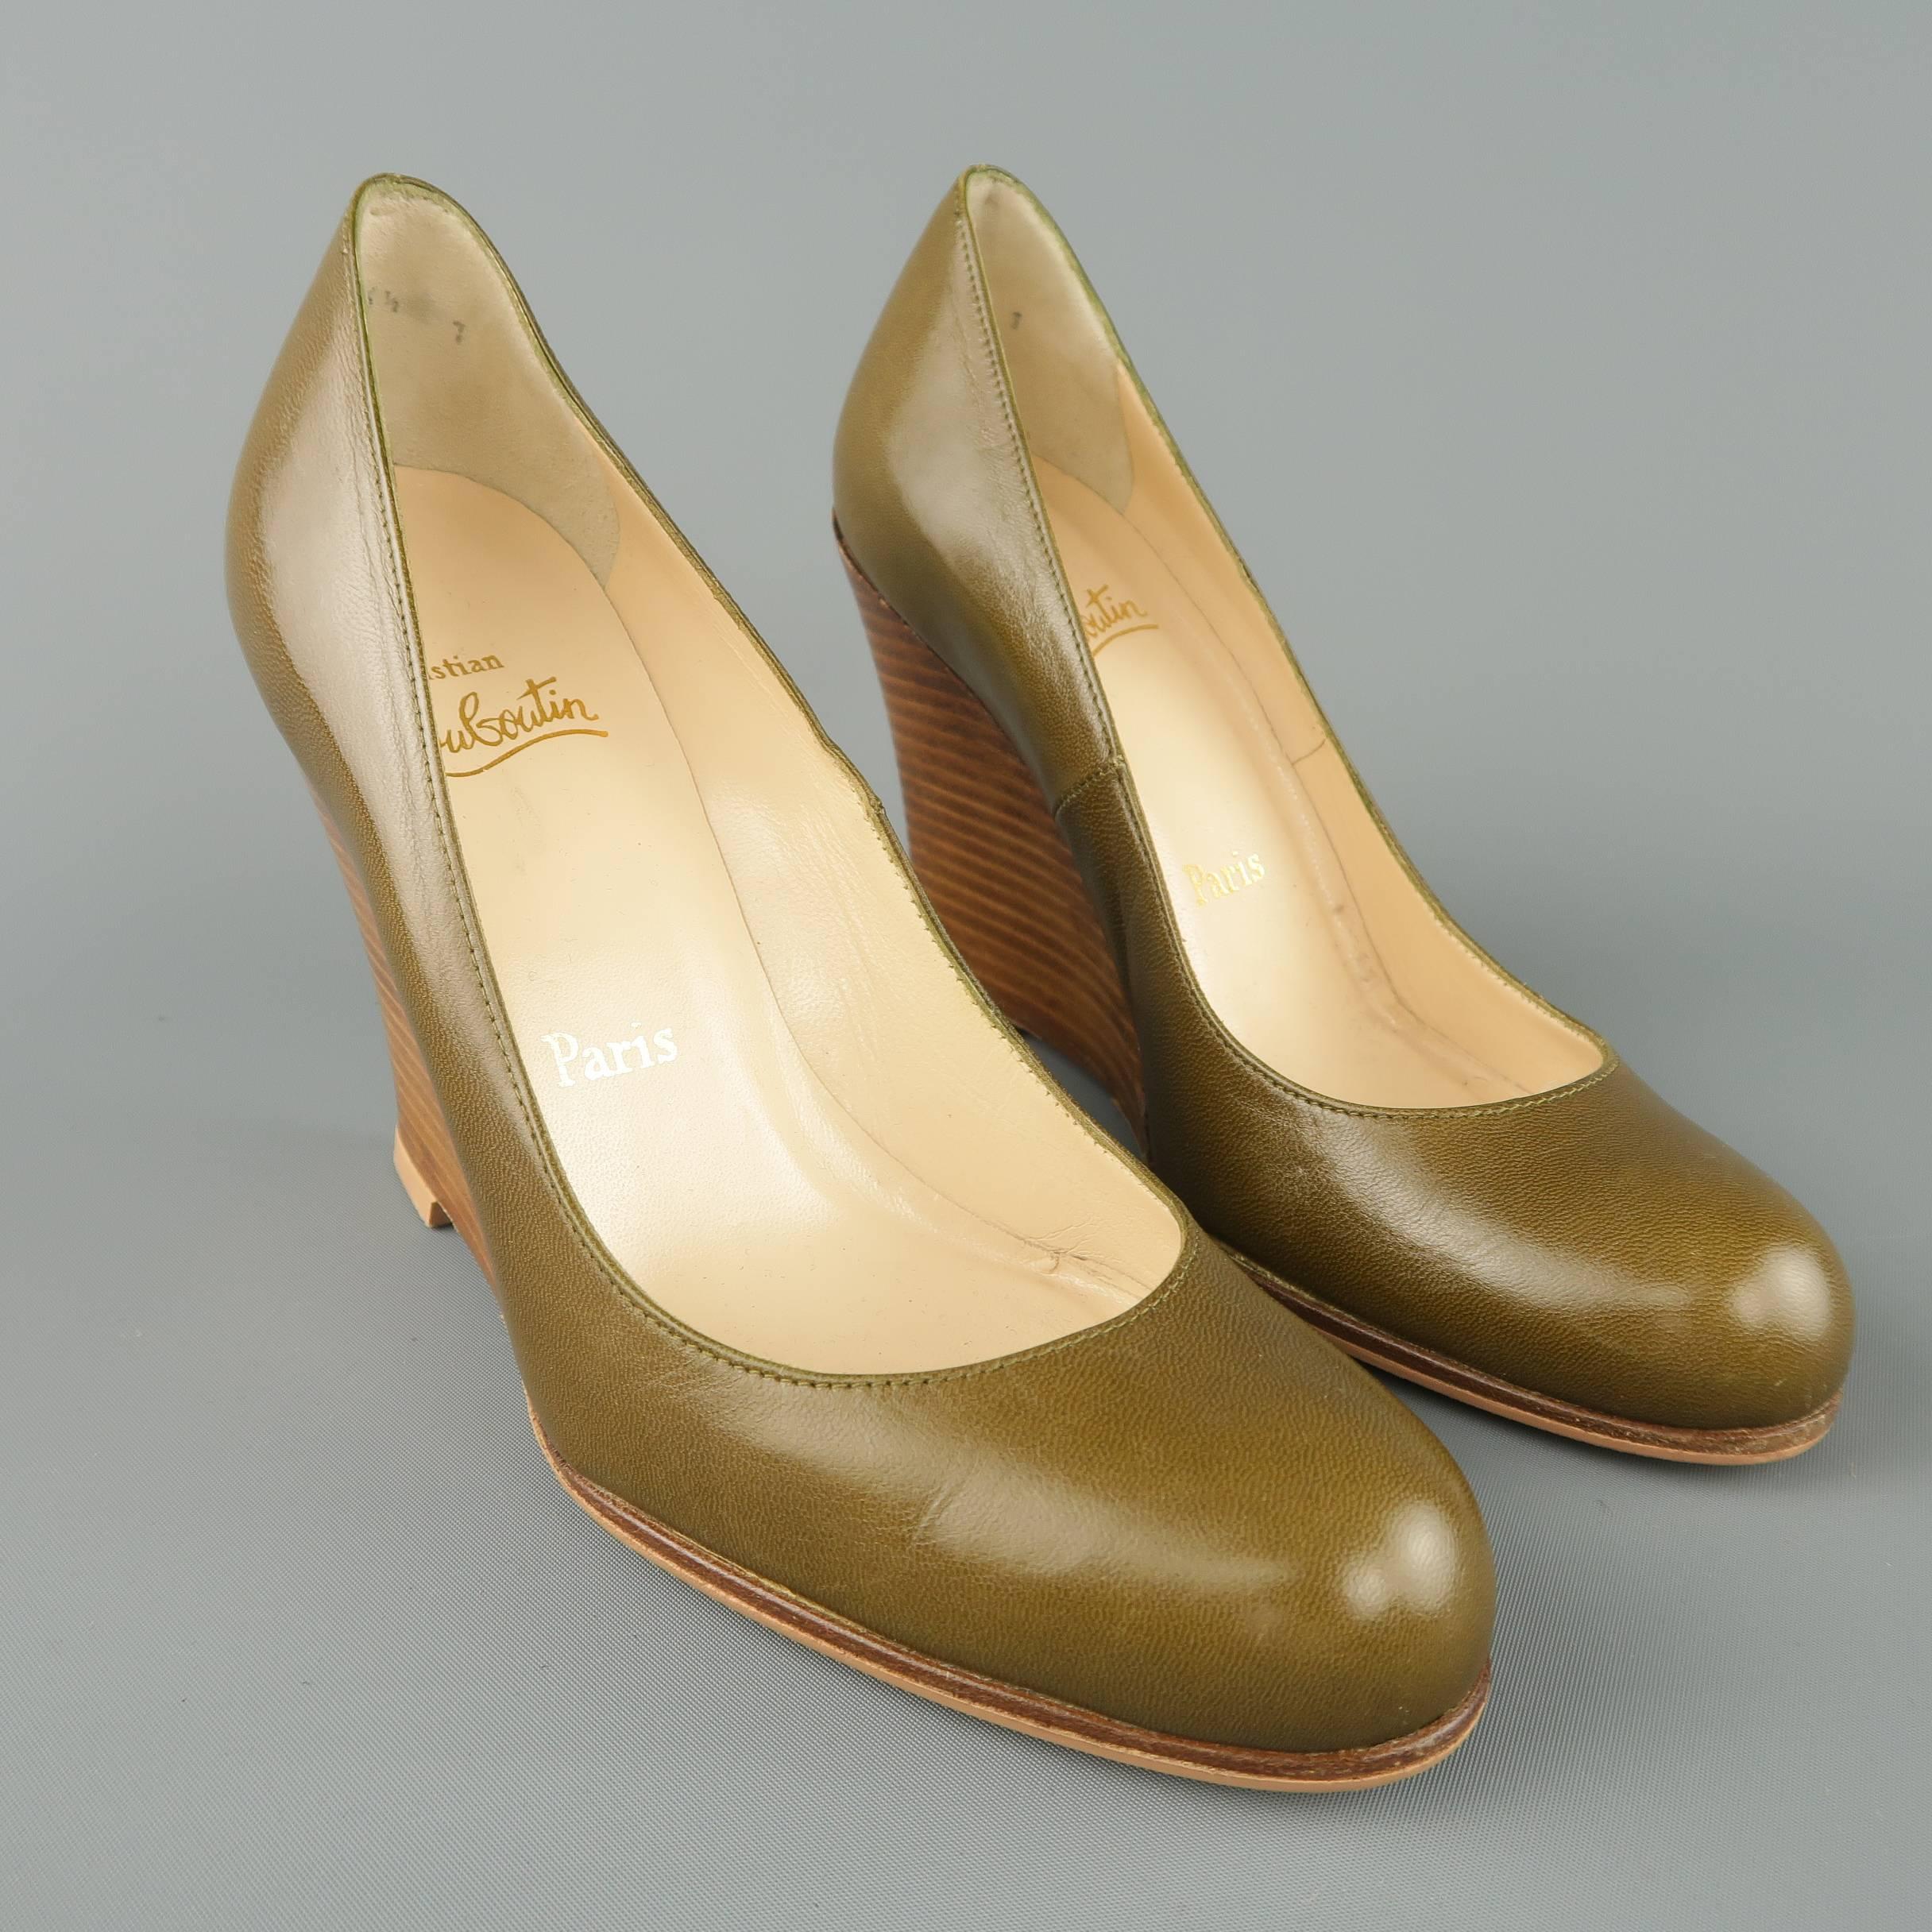 Christian Louboutin pumps come in olive green leather with a tan stacked leather wedge heel. Made in Italy.
 
Good Pre-Owned Condition.
Marked: IT 36.5
 
Measurements:
 
Heel: 3.75 in.
